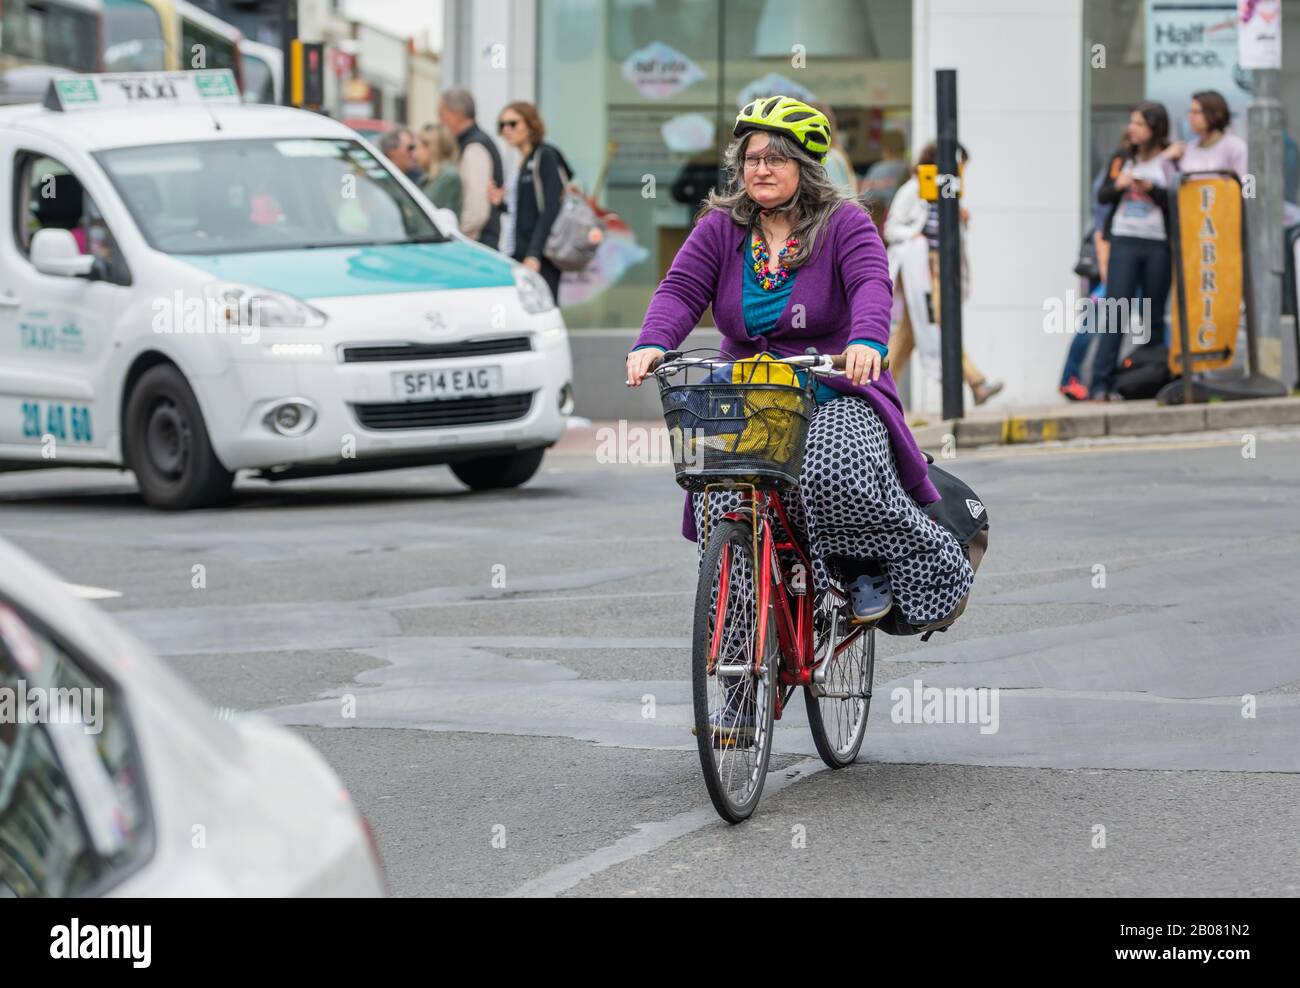 Middle aged female cyclist wearing a helmet riding a bicycle on a road in the busy city of Brighton, England, UK. Woman riding a bike. Stock Photo